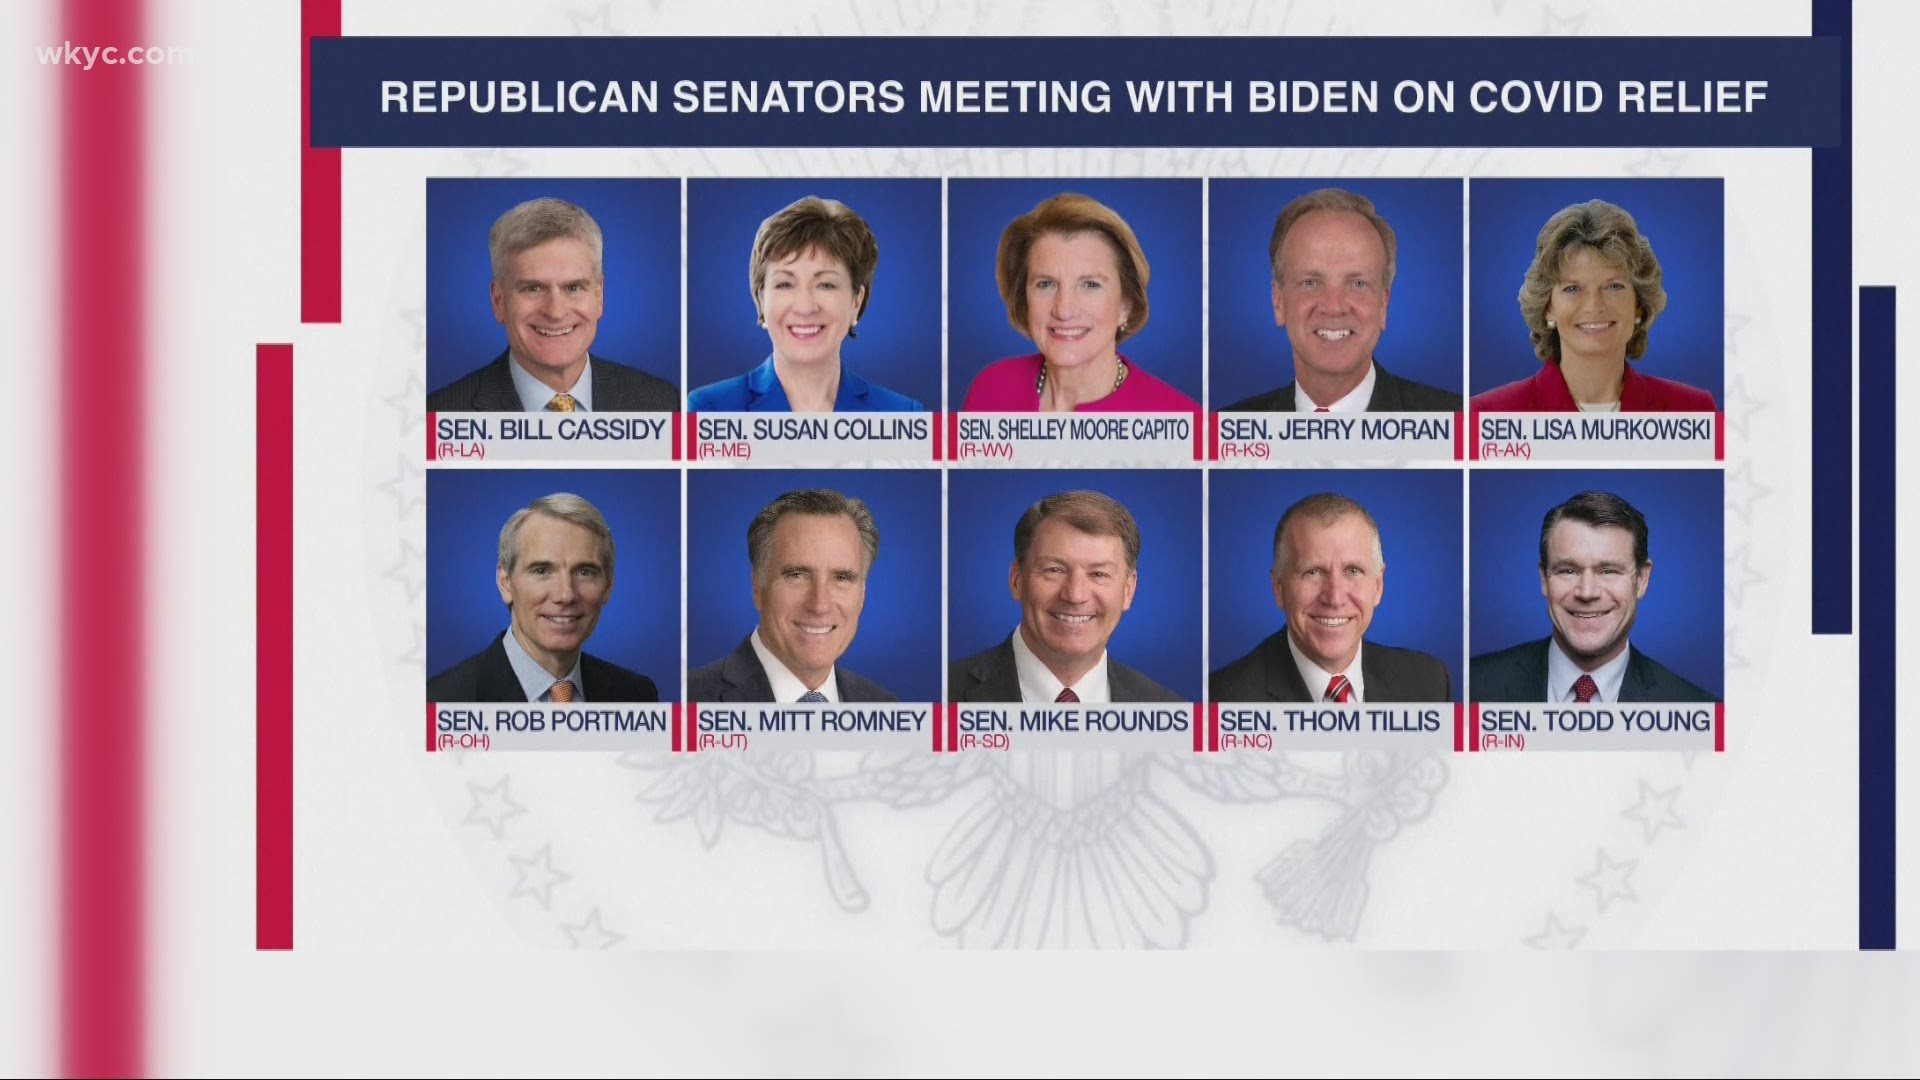 The group, which includes Sen. Rob Portman (R-OH) is meeting with President Biden to find compromise. Democrats say it might not be necessary, though.